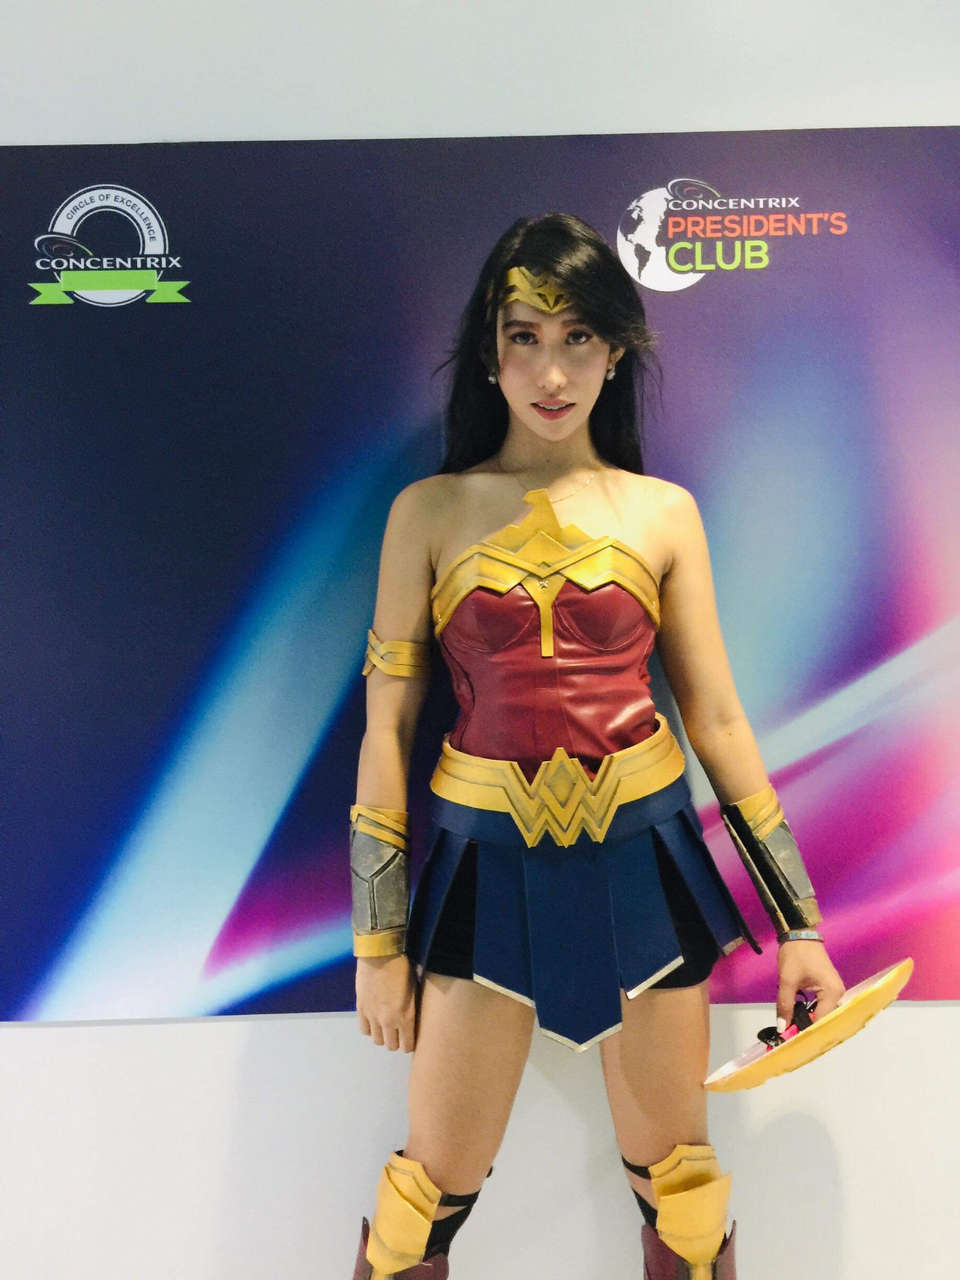 My Fiance As Wonder Woman During A Corporate Event 0